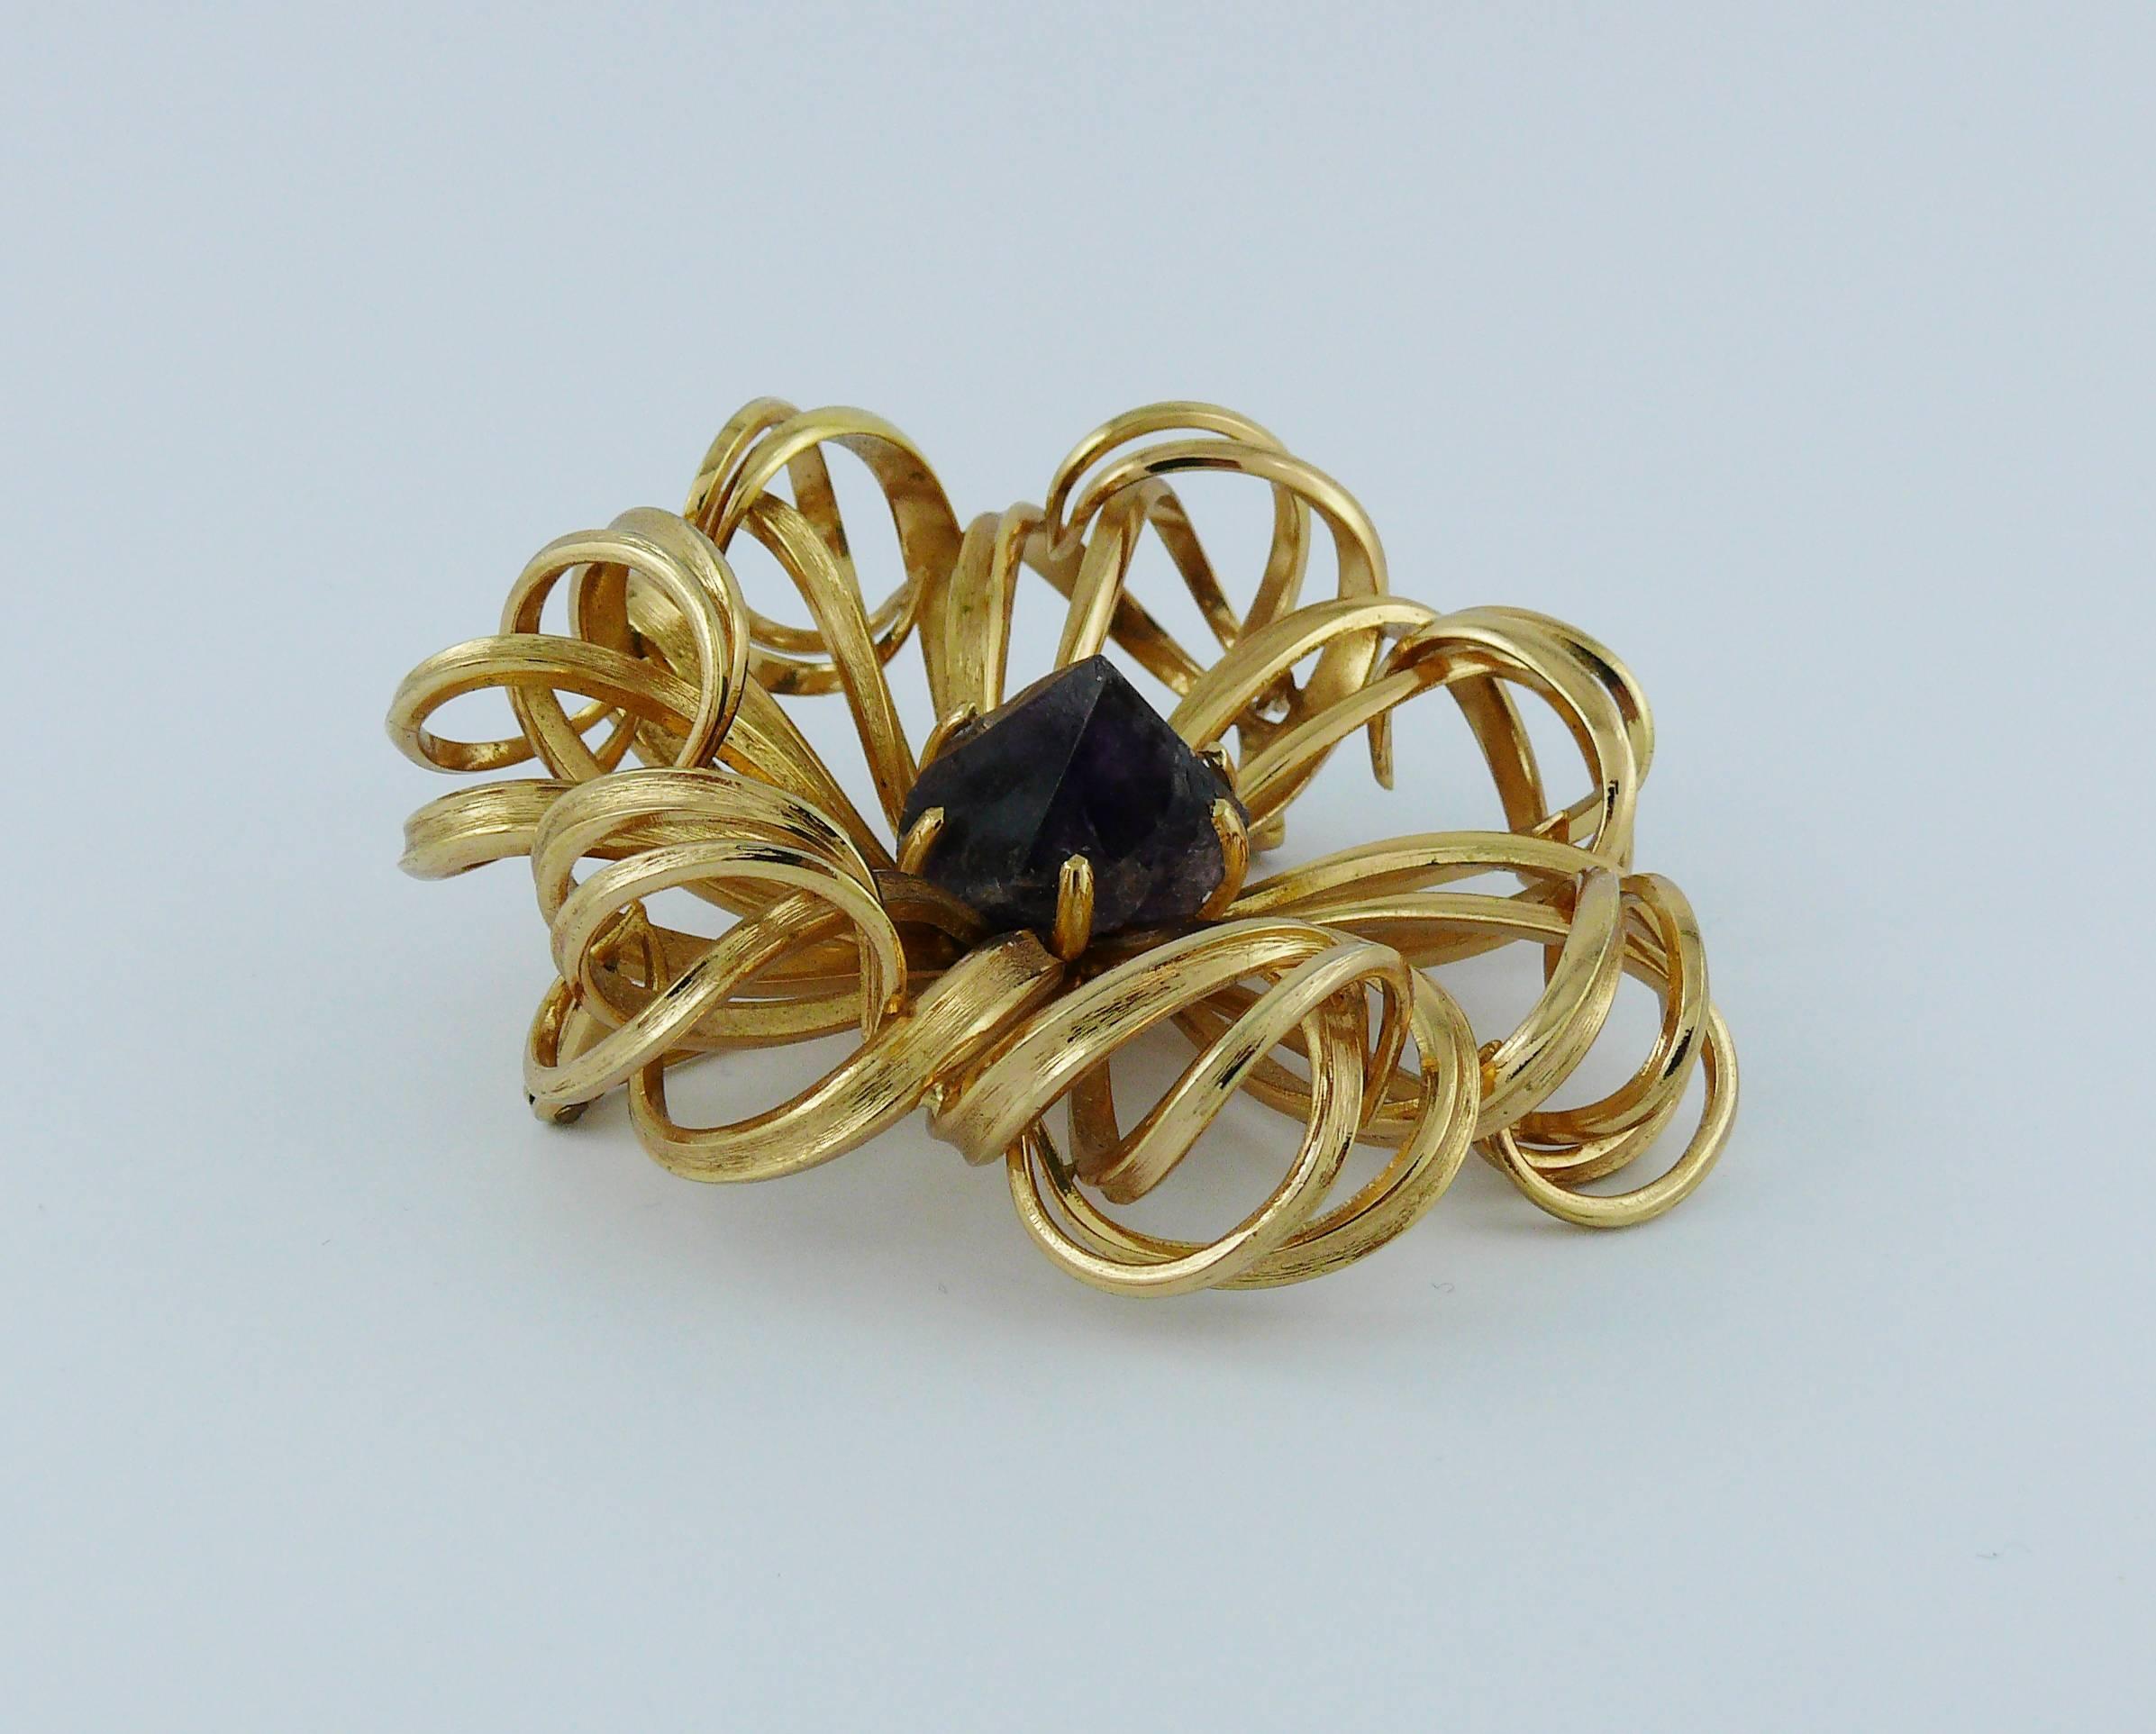 CHRISTIAN DIOR absolutely gorgeous vintage massive gold toned brooch featuring a stylized 3-D flower design with amethyst gemstone.

Embossed 19 CHR. DIOR © 66 Germany.

Indicative measurements : diameter approx. 6.5 cm (2.56 inches).

JEWELRY